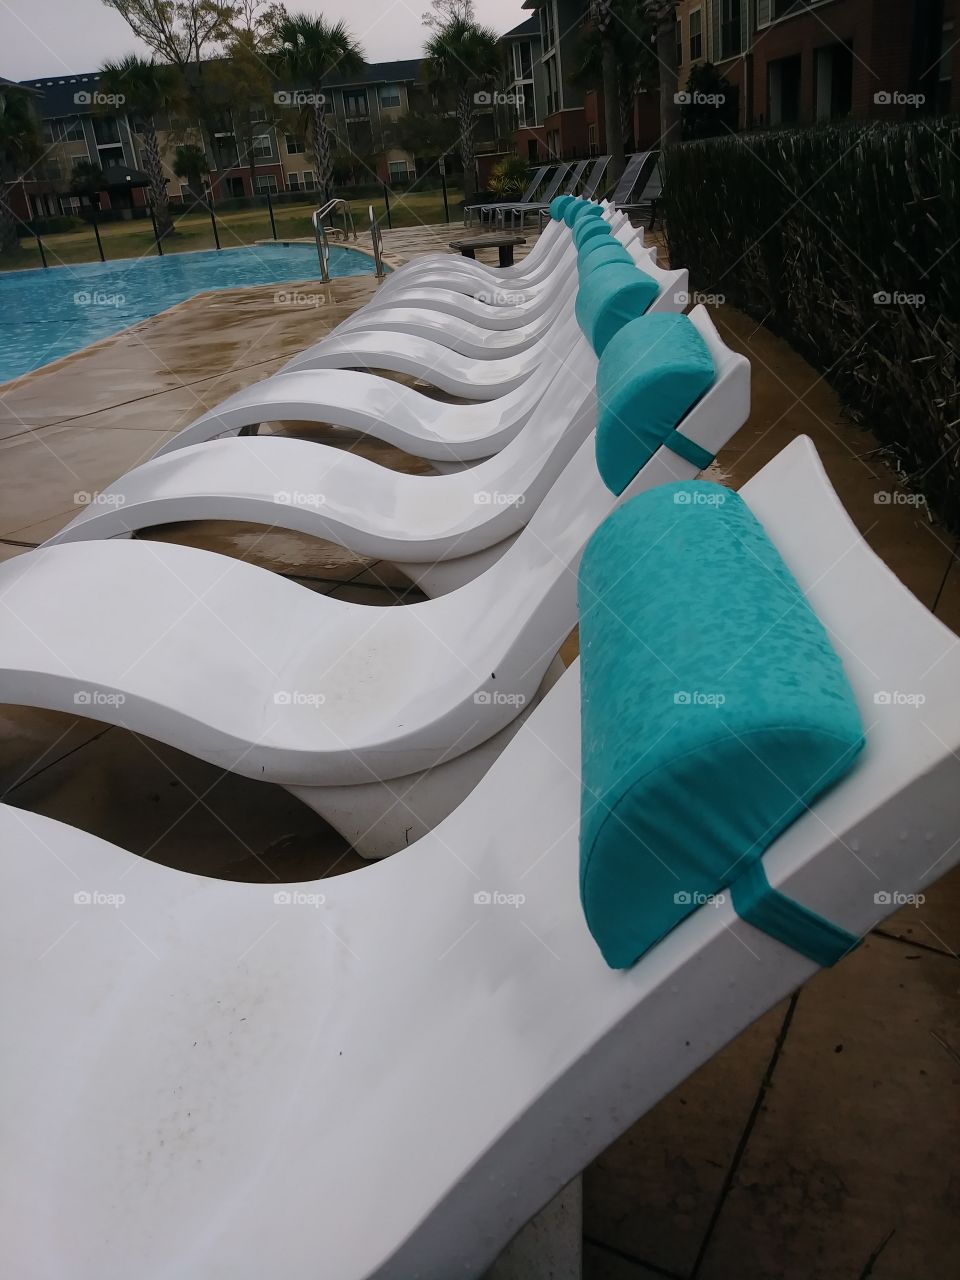 rainy chairs by the pool